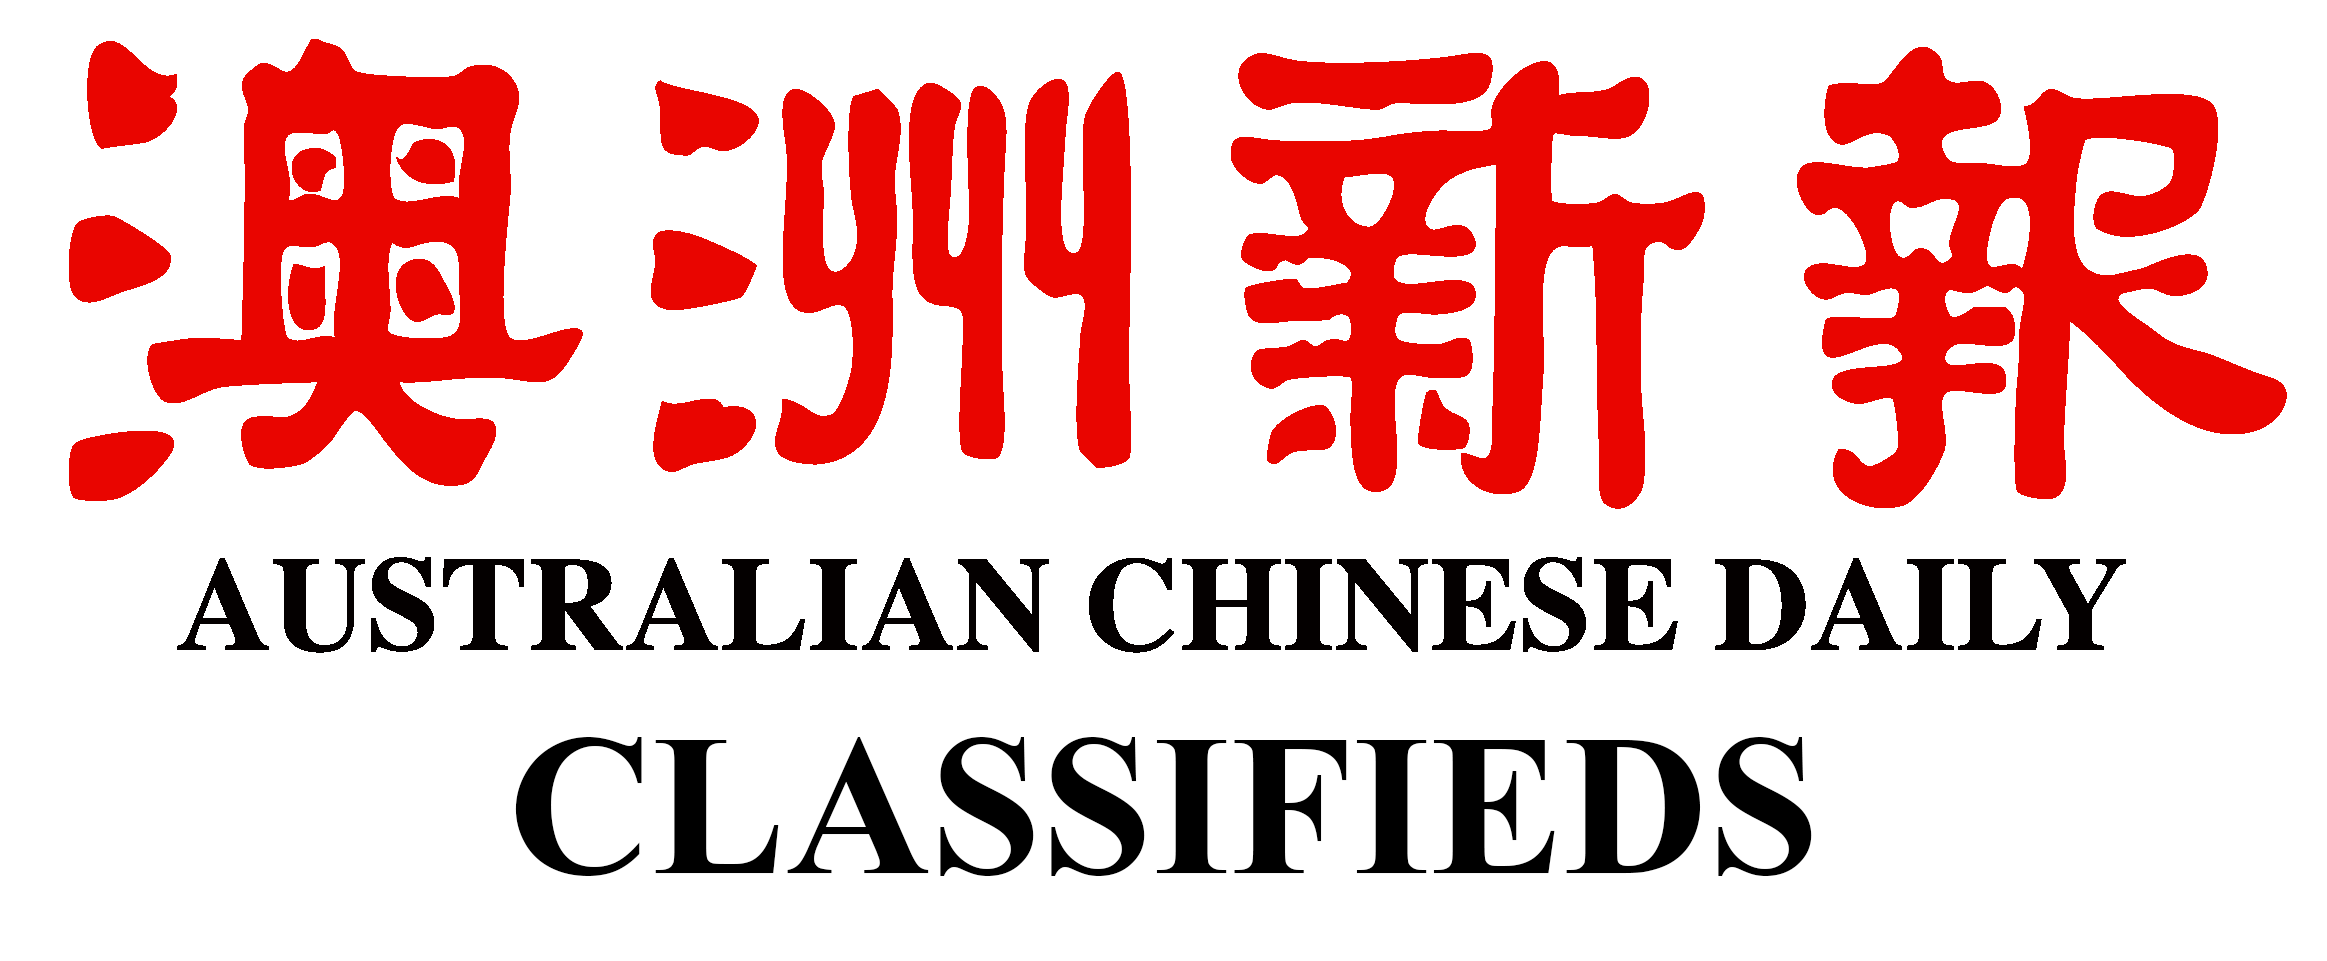 Australian Chinese Daily Classifieds